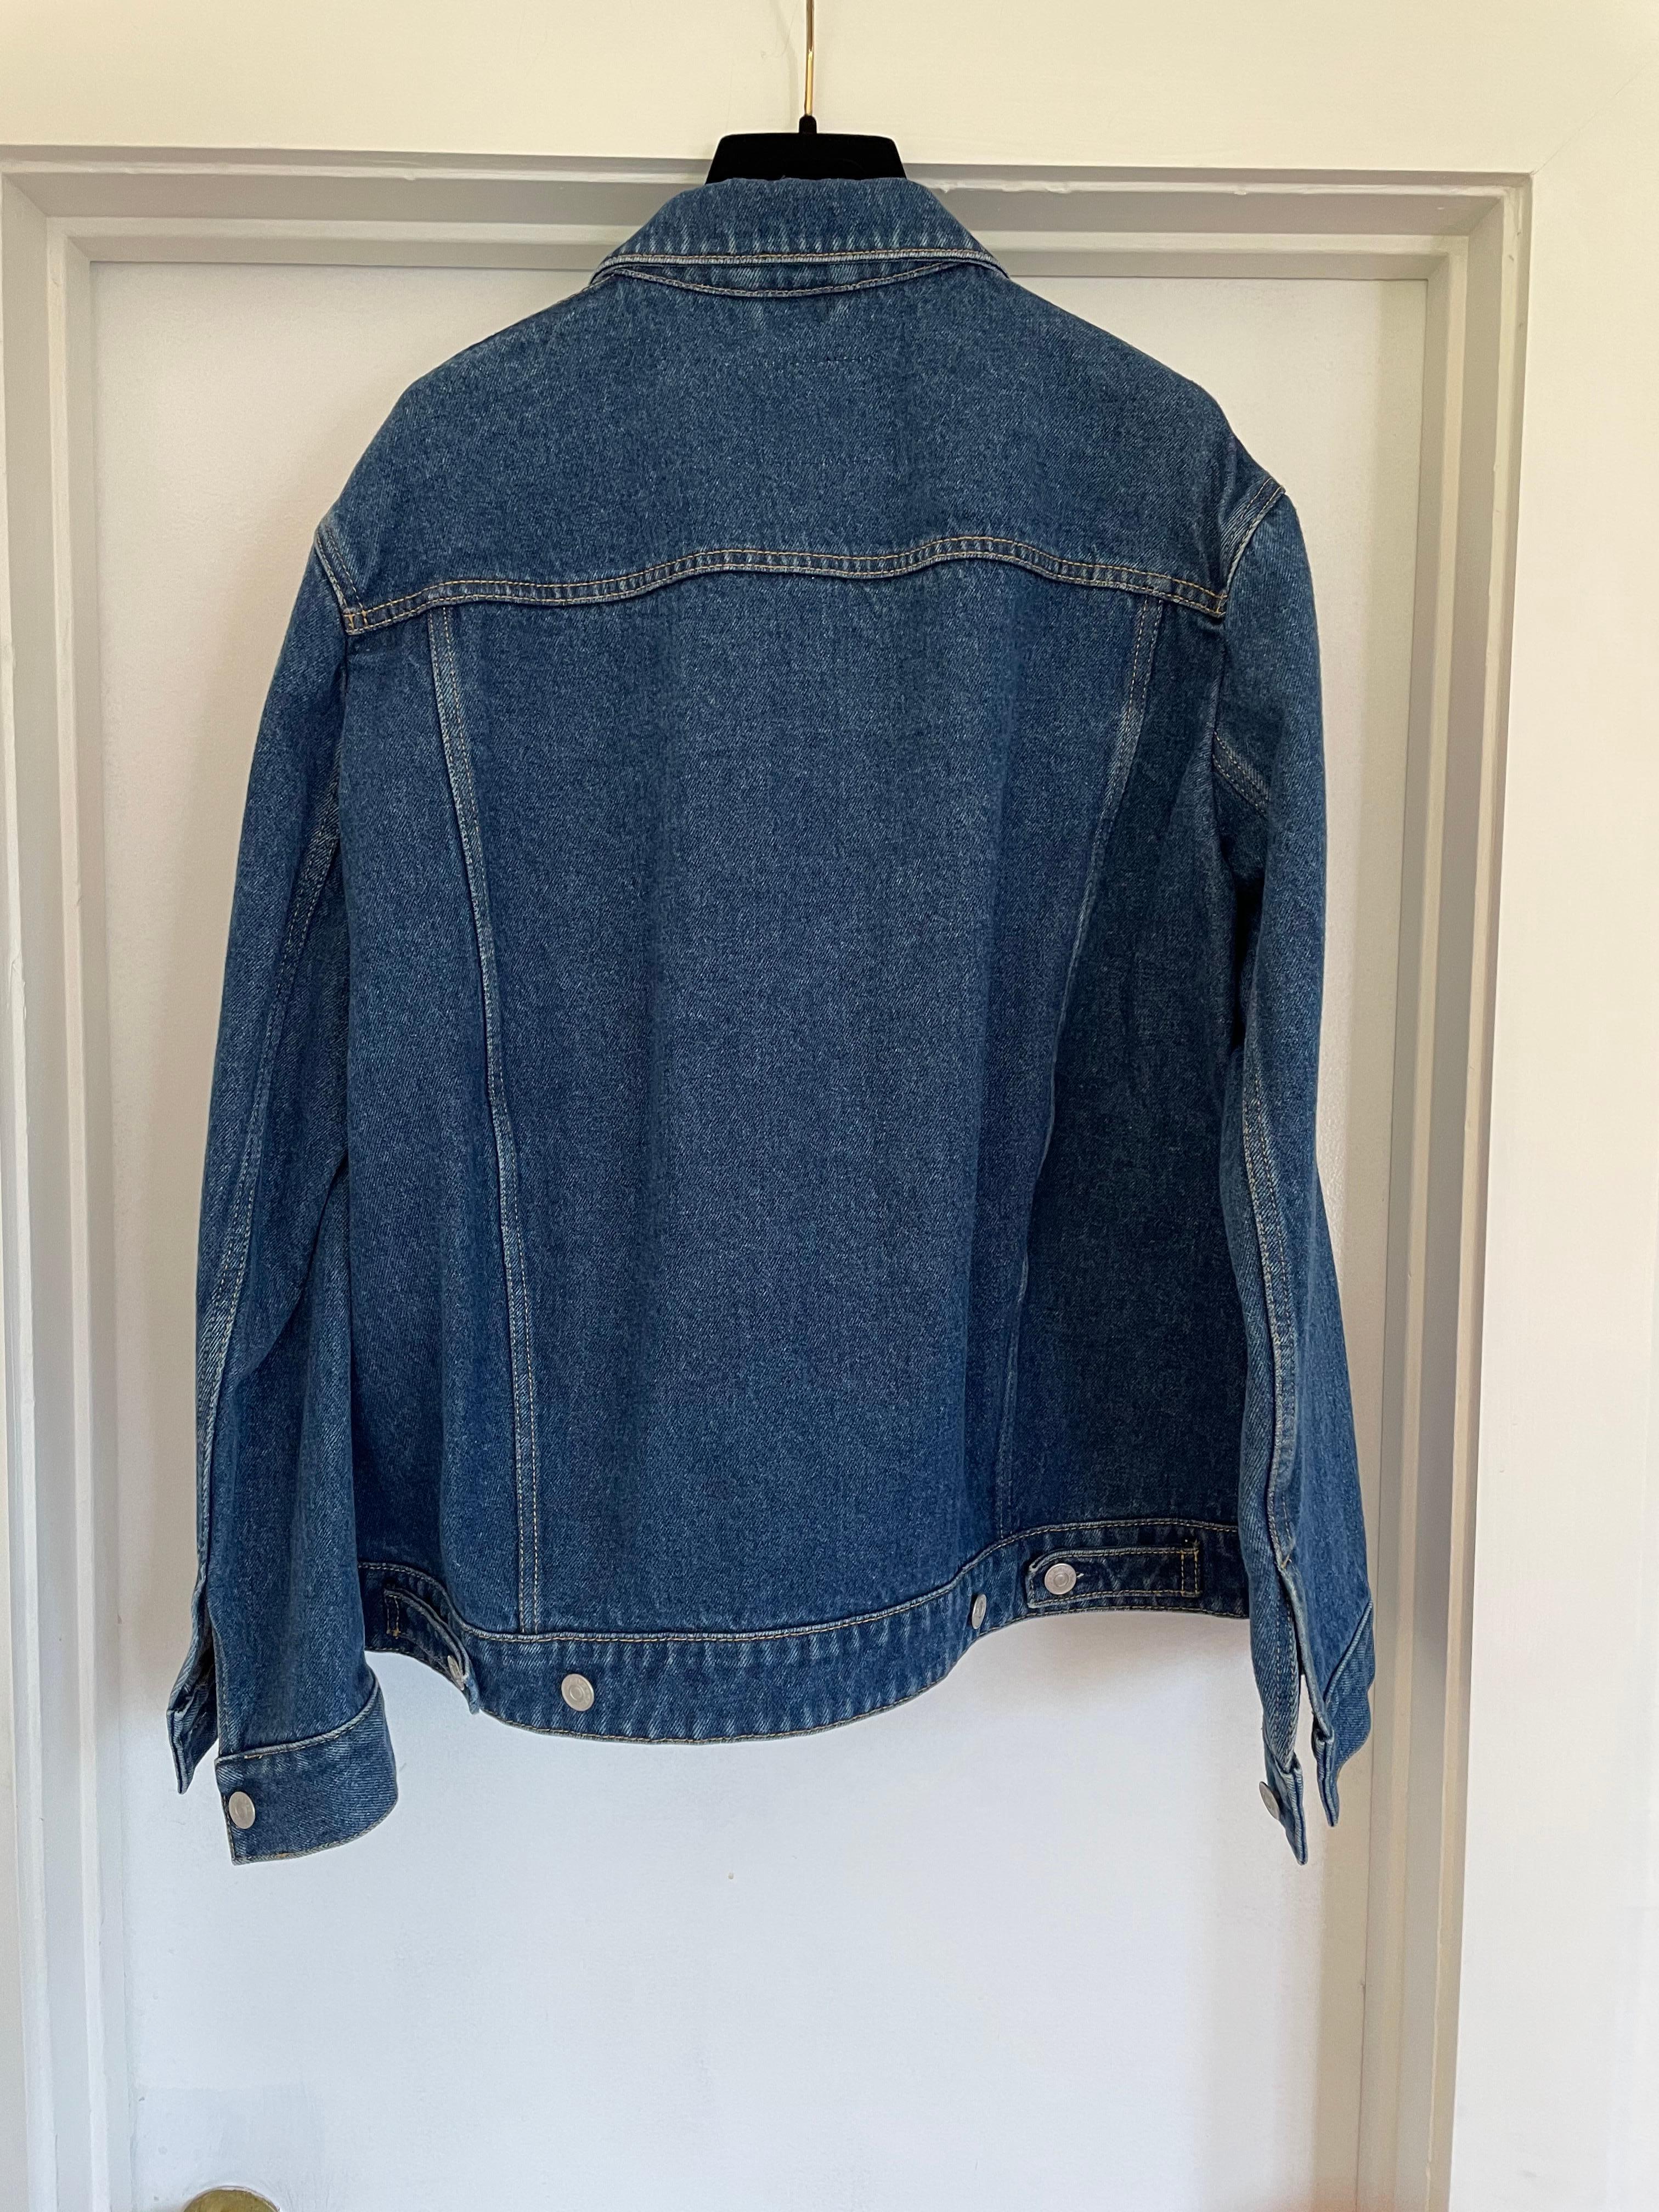 Dark blue denim jacket with unique shape designed by Demna Gvasalia for Balenciaga. French Size 38. Approximate measurements: shoulder 19' and arm length 24